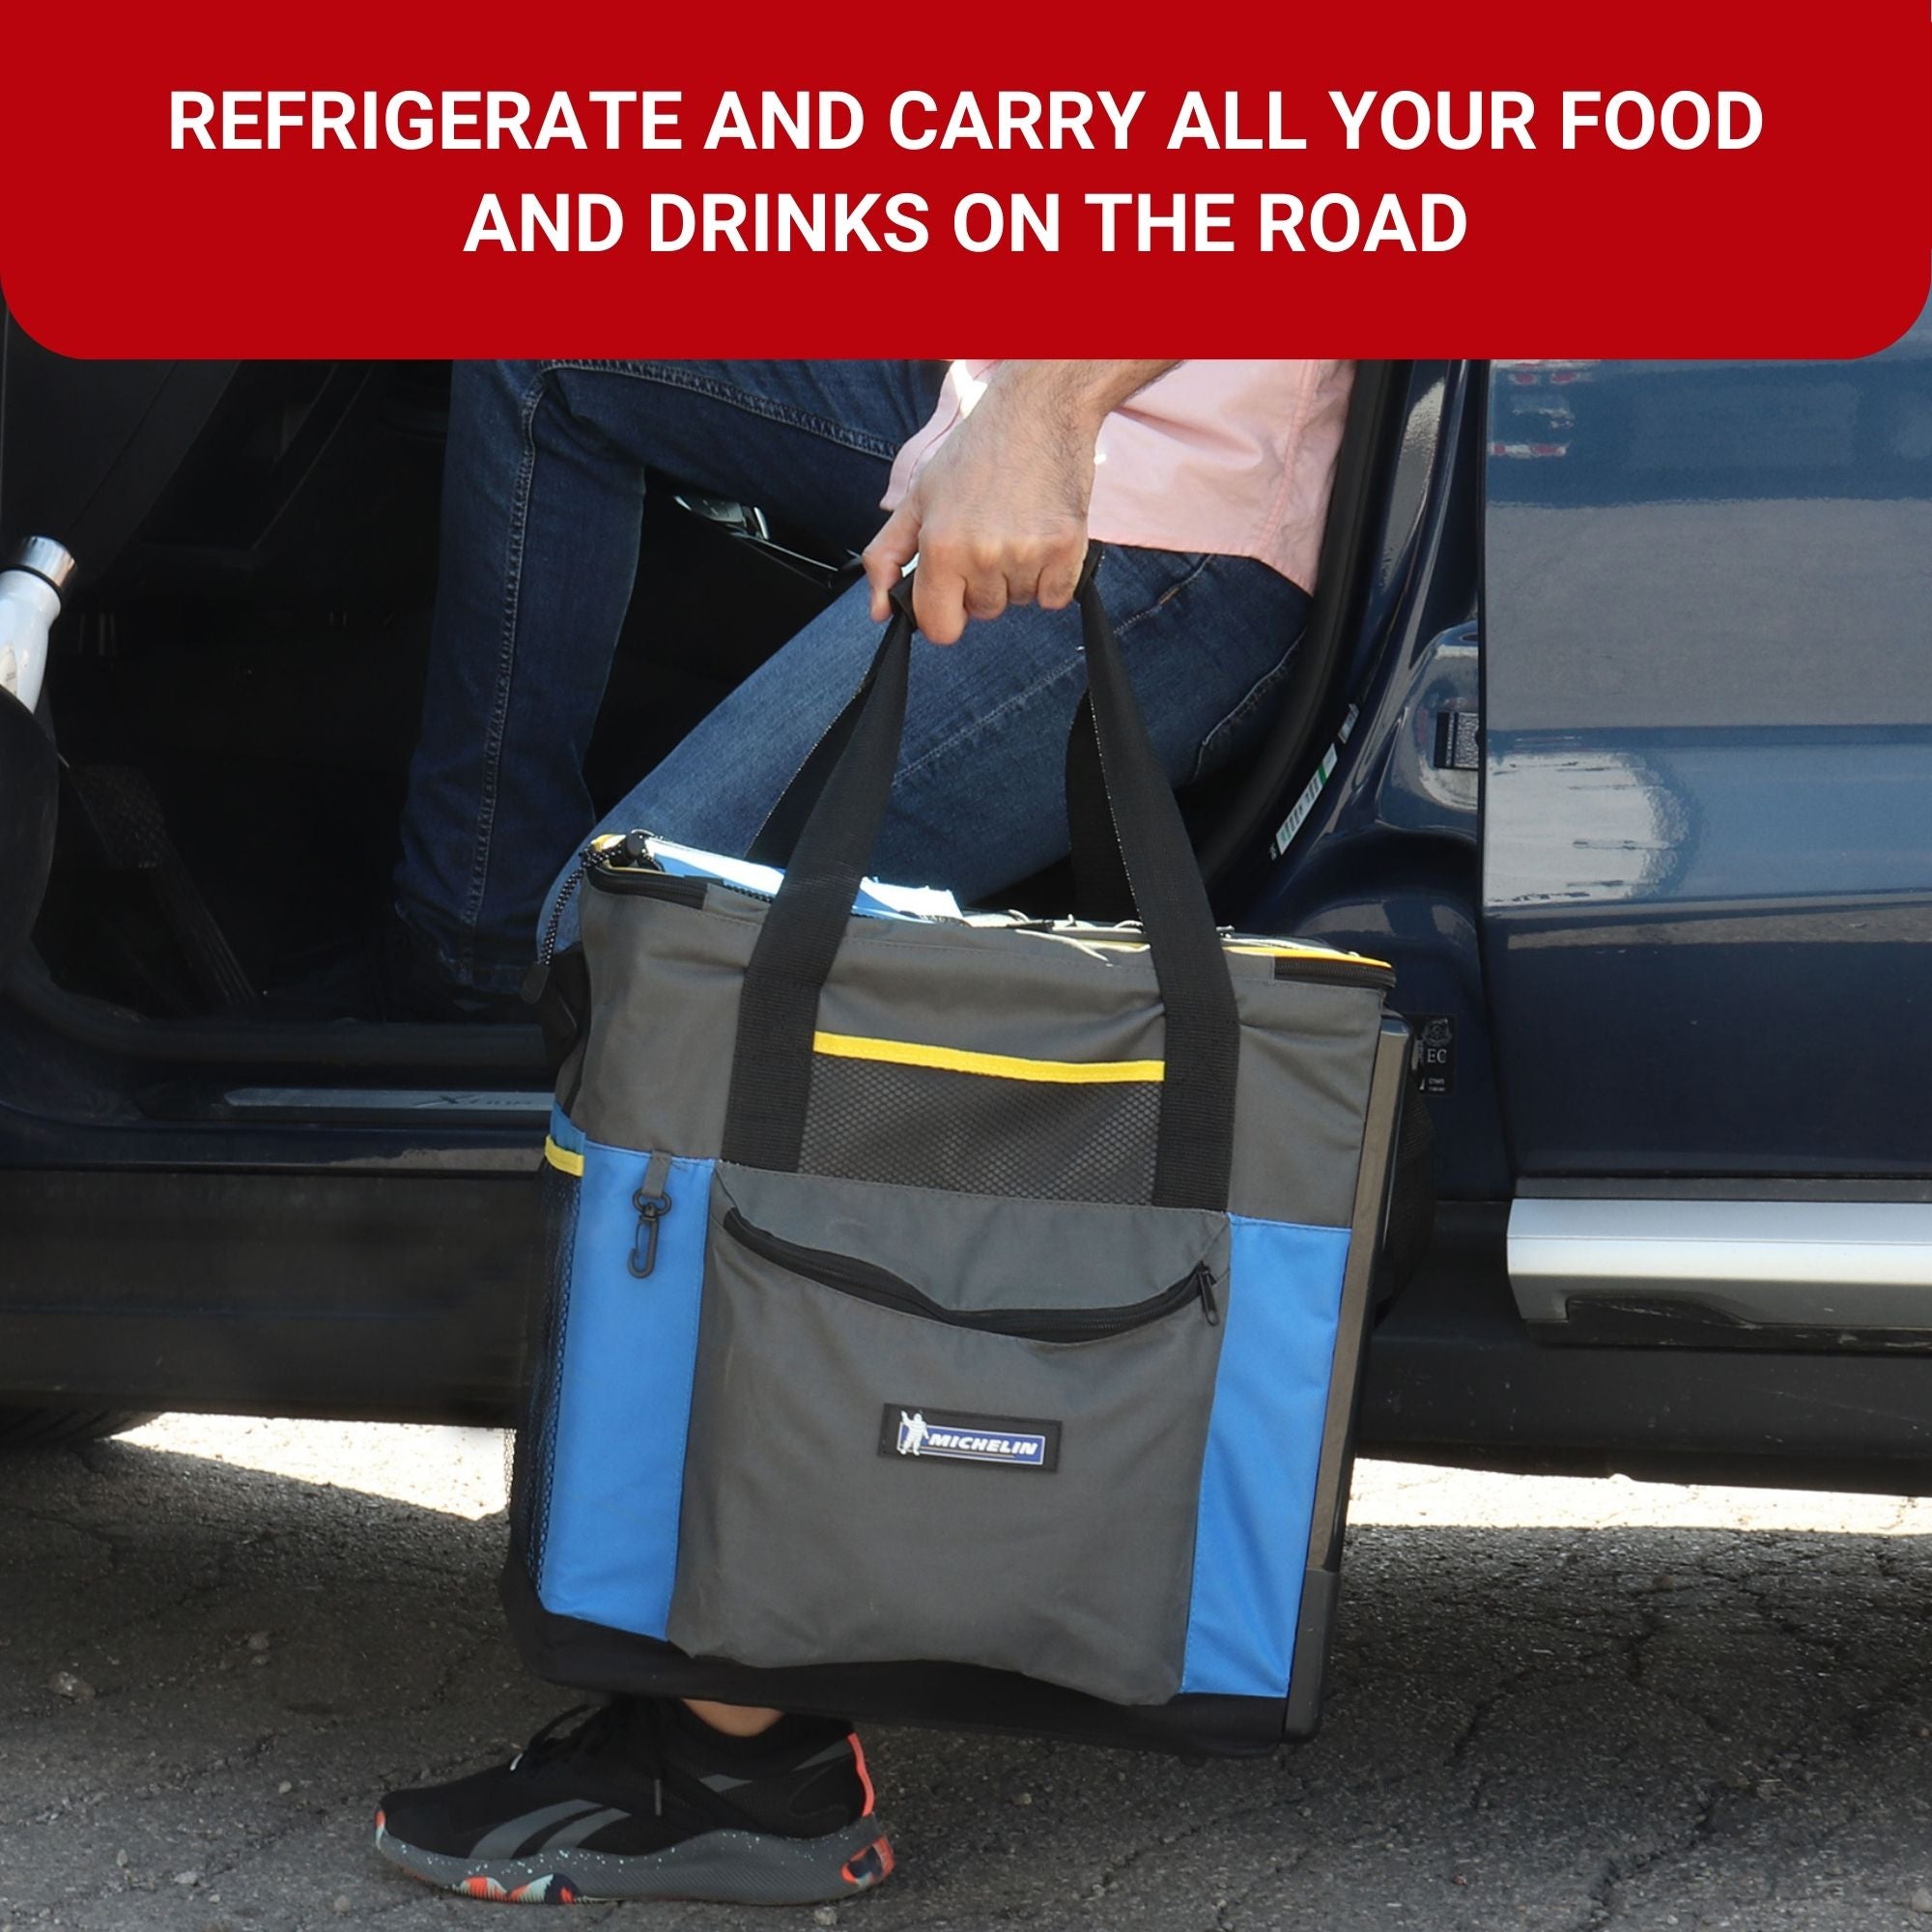 A person holding the Michelin portable 12V cooler/warmer bag by the handles stepping into a pickup truck. Text above reads, "REFRIGERATE AND CARRY ALL YOUR FOOD AND DRINKS ON THE ROAD"